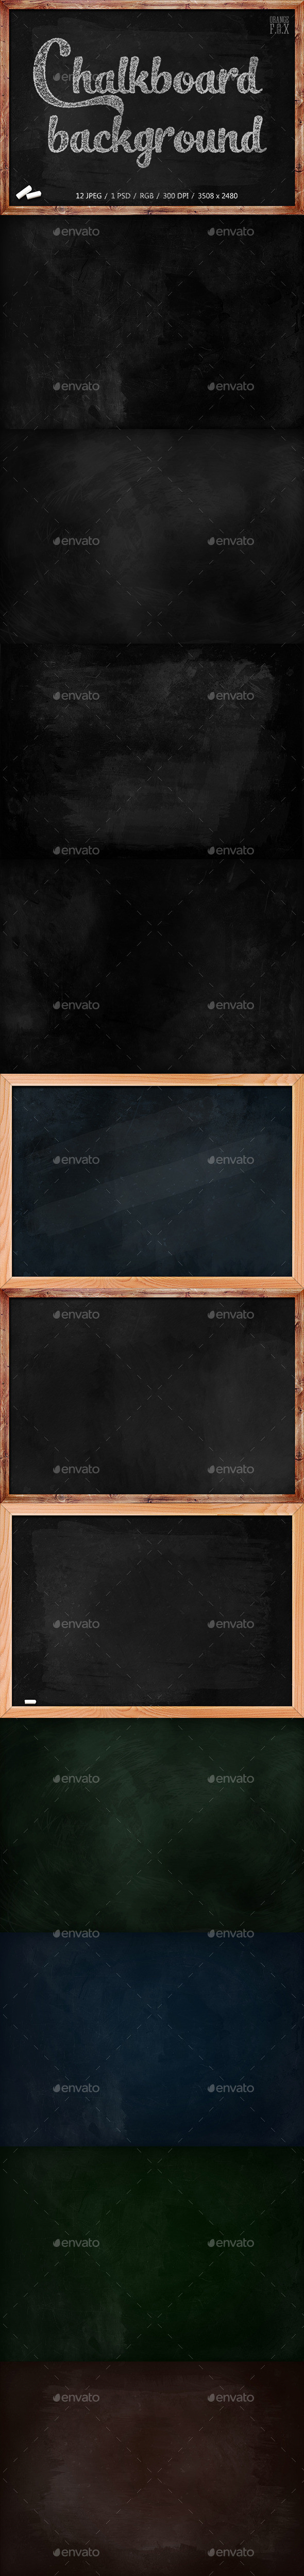 Chalkboard 20background preview